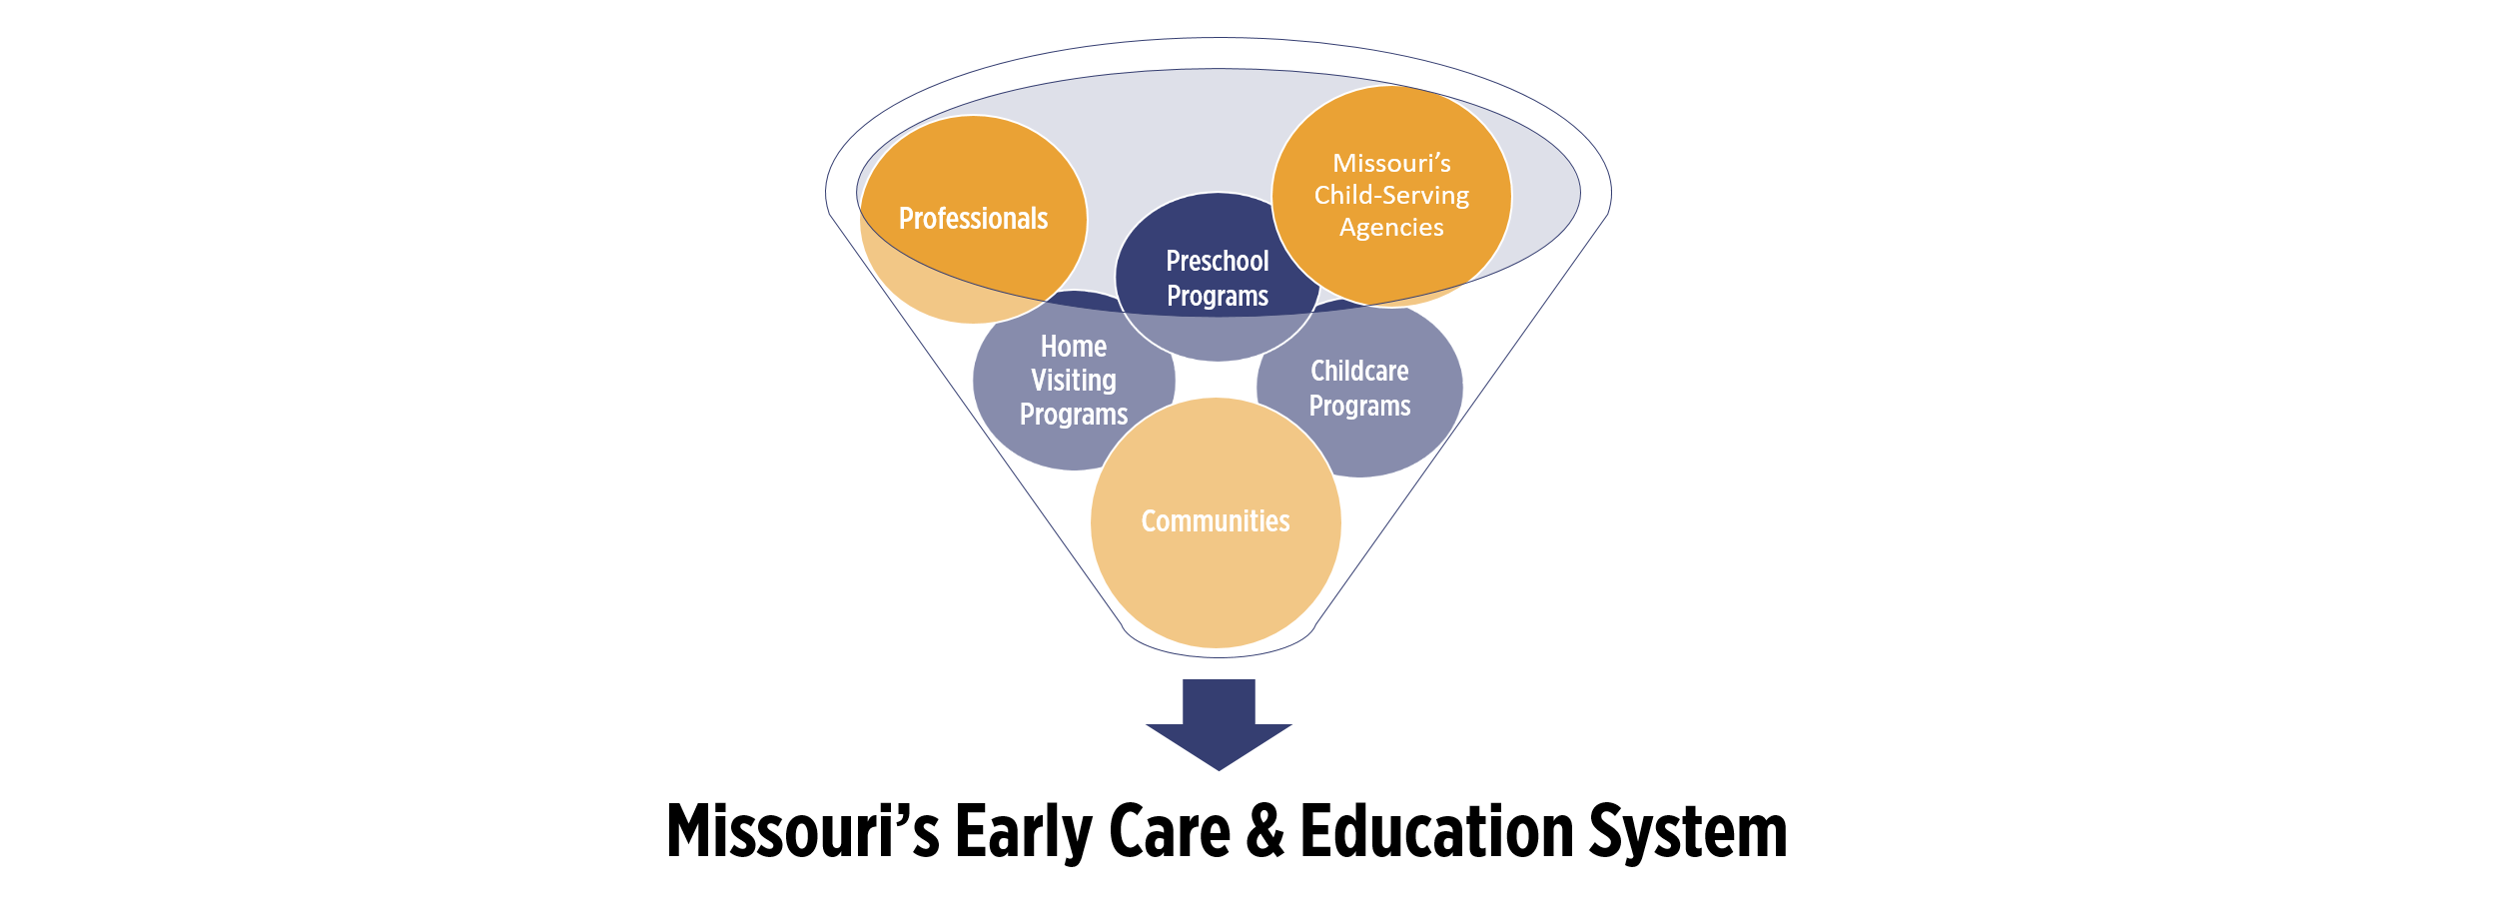 MO's Early Care and Education System =Professional, Preschools Programs, MO's Child-serving agencies, Home visiting programs childcare programs and communities